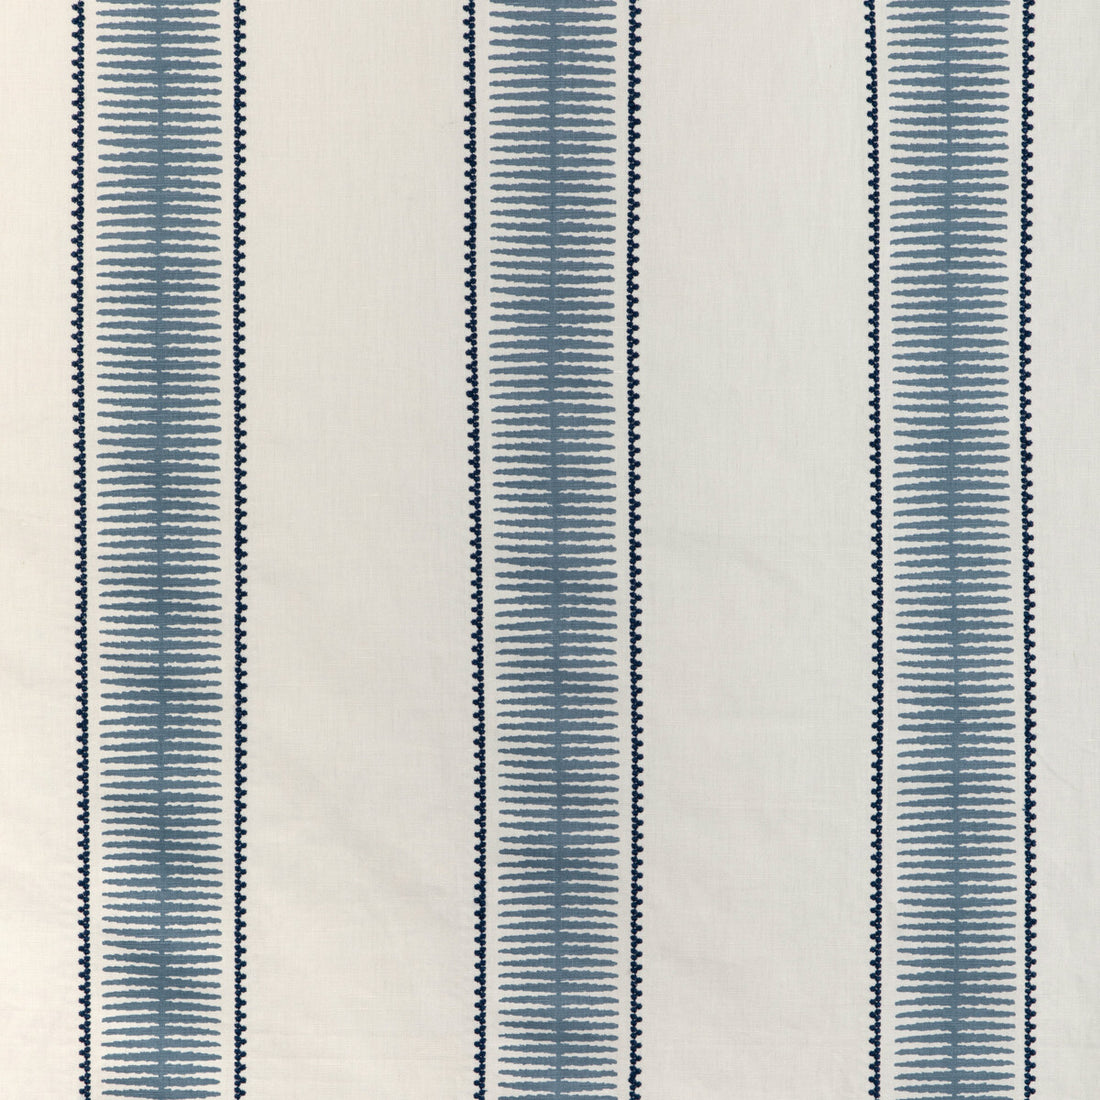 Baluster fabric in indigo color - pattern BALUSTER.5.0 - by Kravet Design in the Alexa Hampton collection